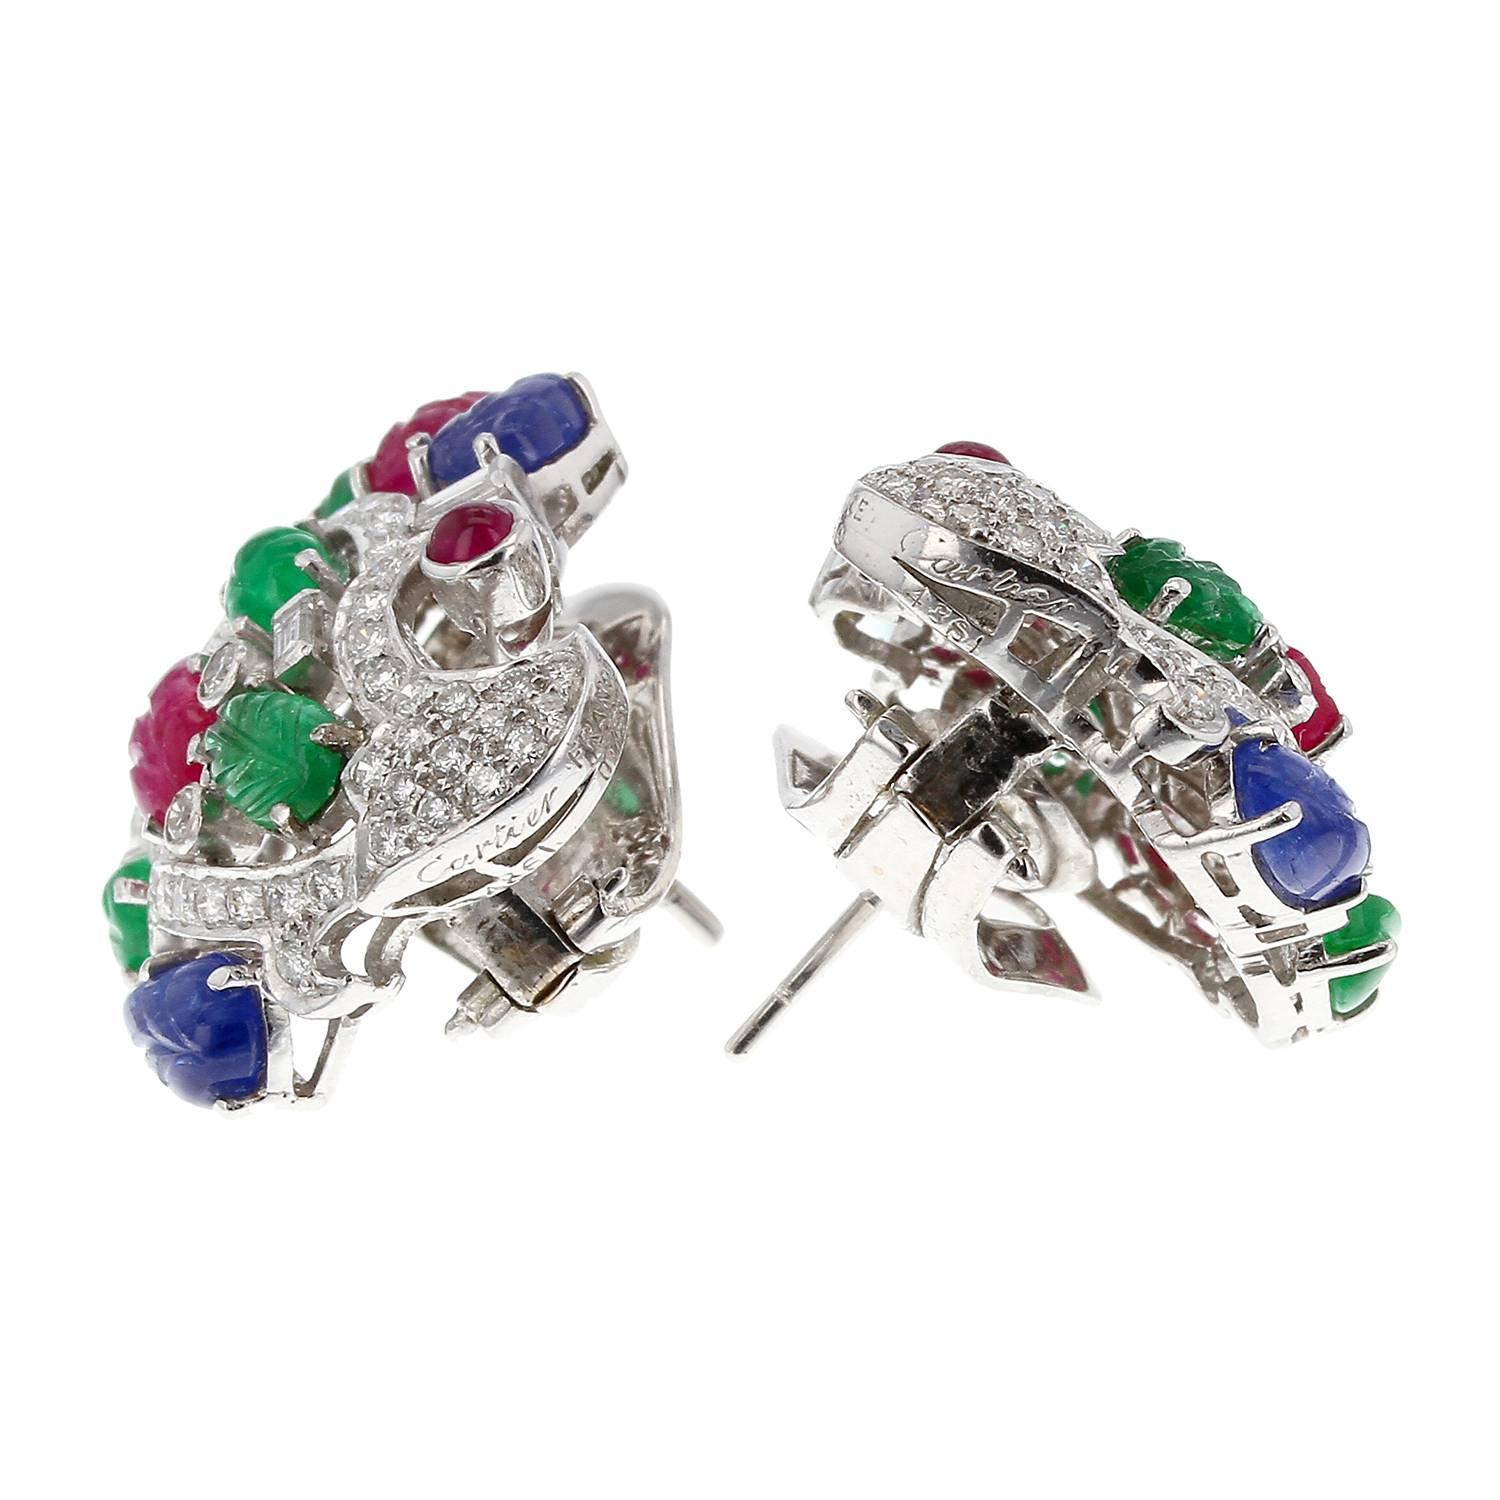 An extremely rare and magnificent Tutti Frutti earrings by Cartier, France. The post and clip-on earrings exhibit a floral design set with carved emeralds, sapphires, rubies, accented with full, single, and baguette-cut diamonds; each signed and